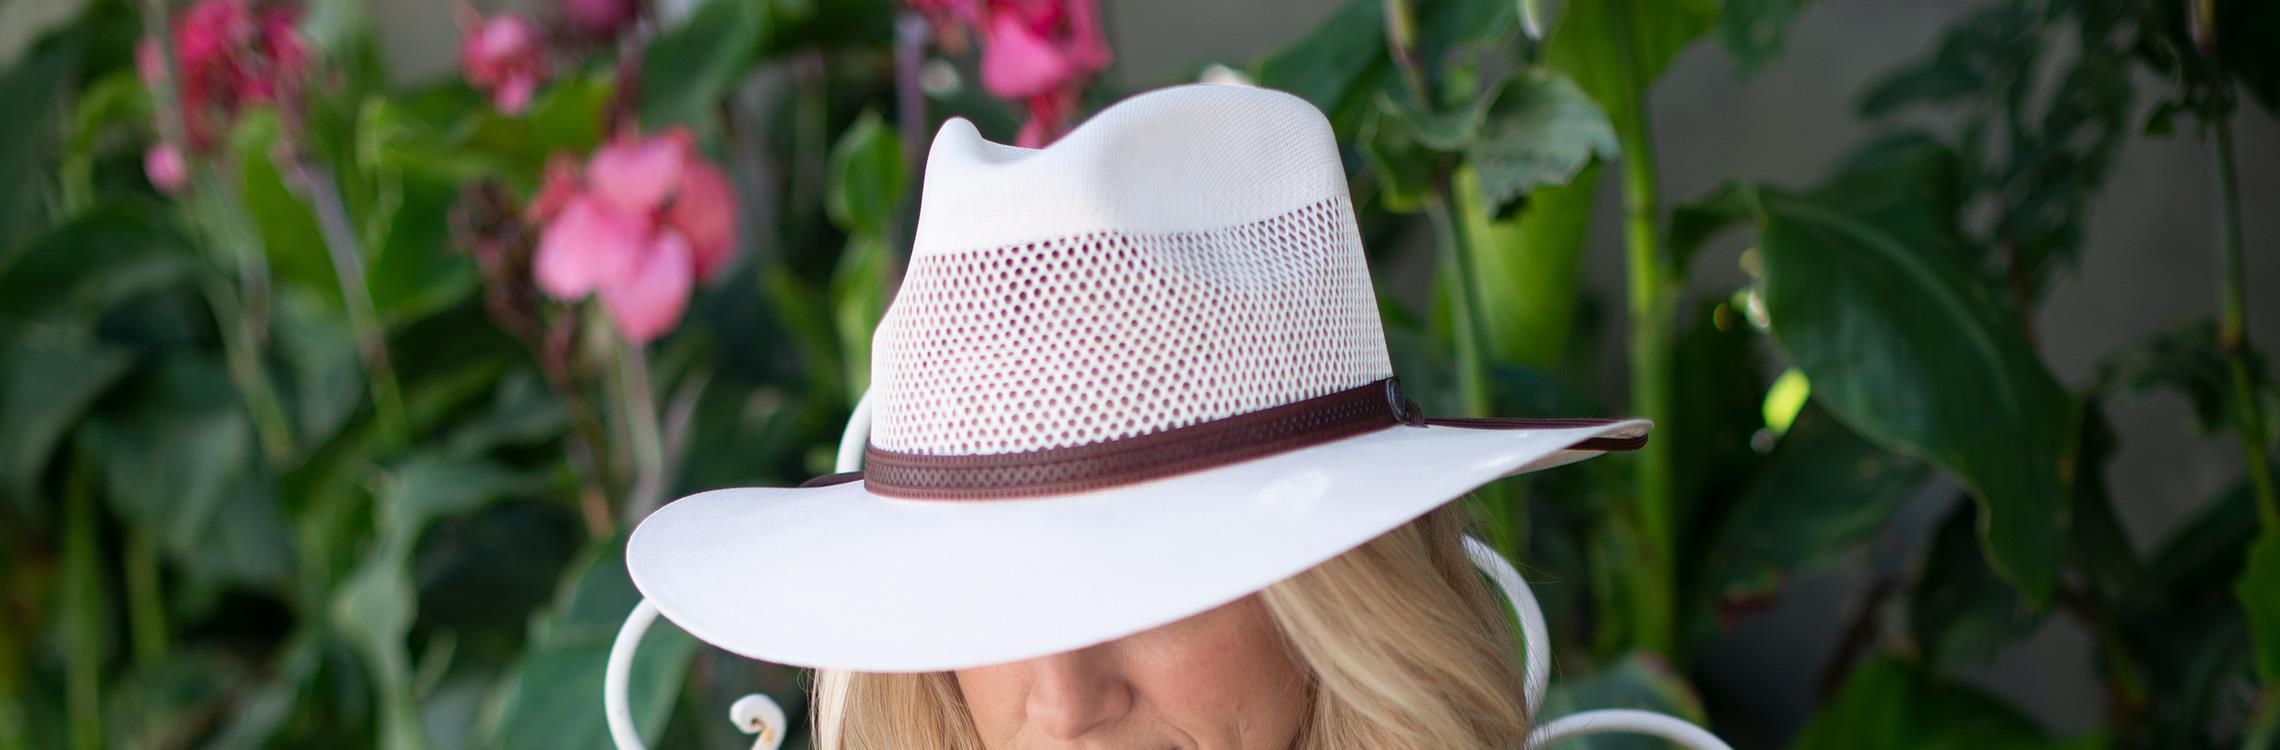 How to Clean a Straw Hat: Remove Stains and Dirt – American Hat Makers